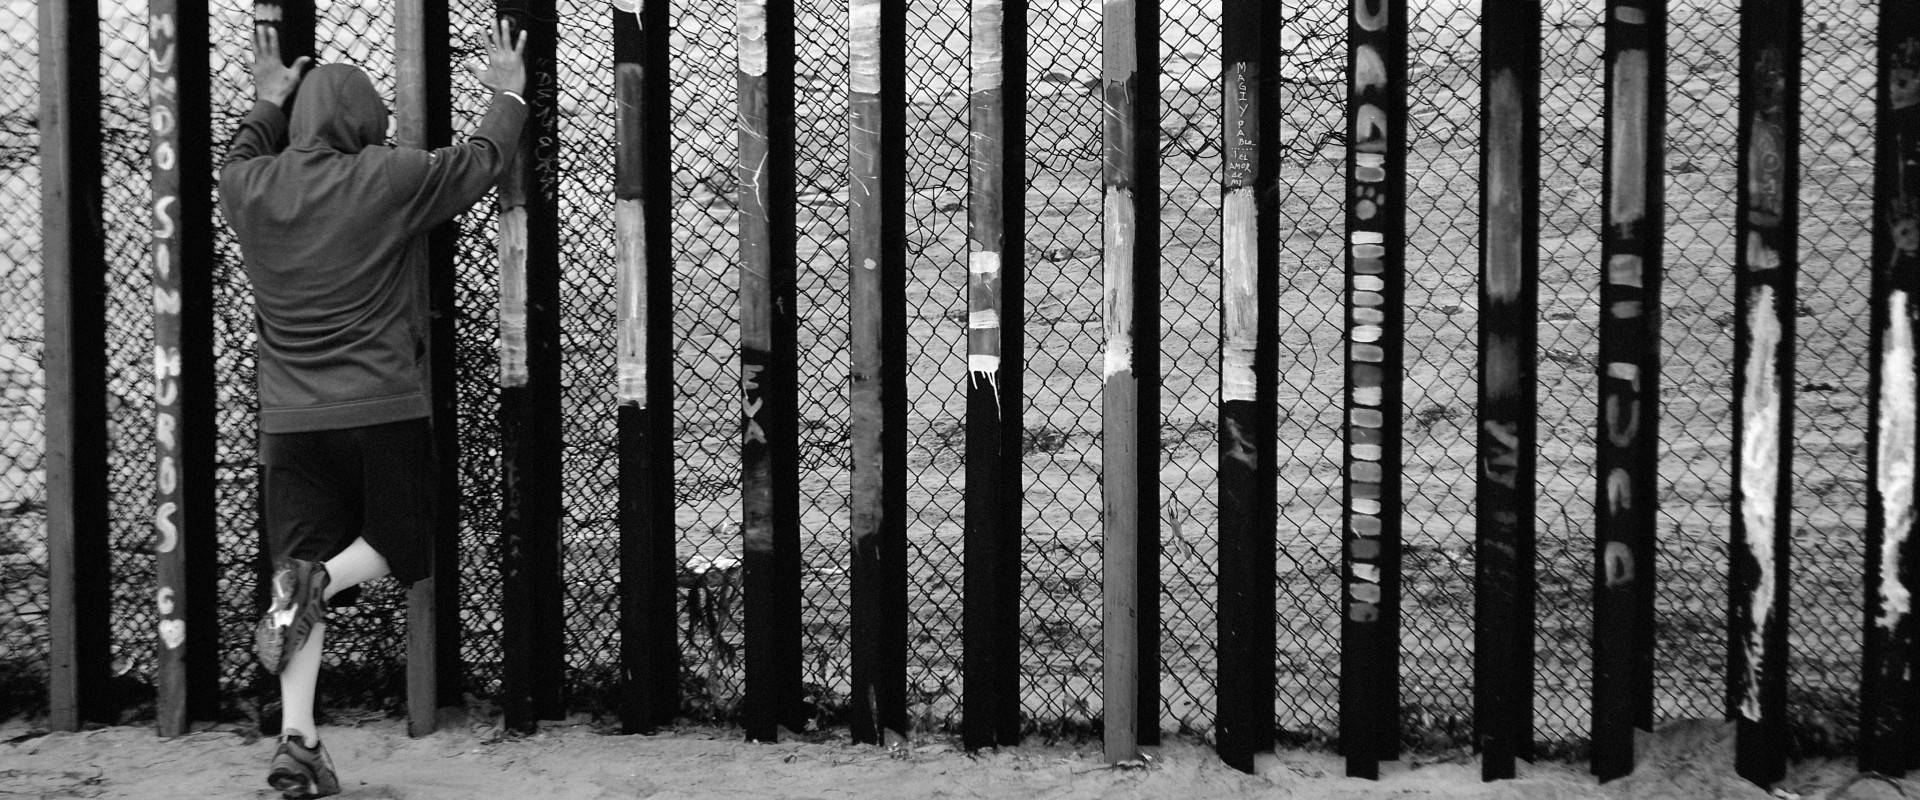 Boy all by himself pushes hands against stark border fence